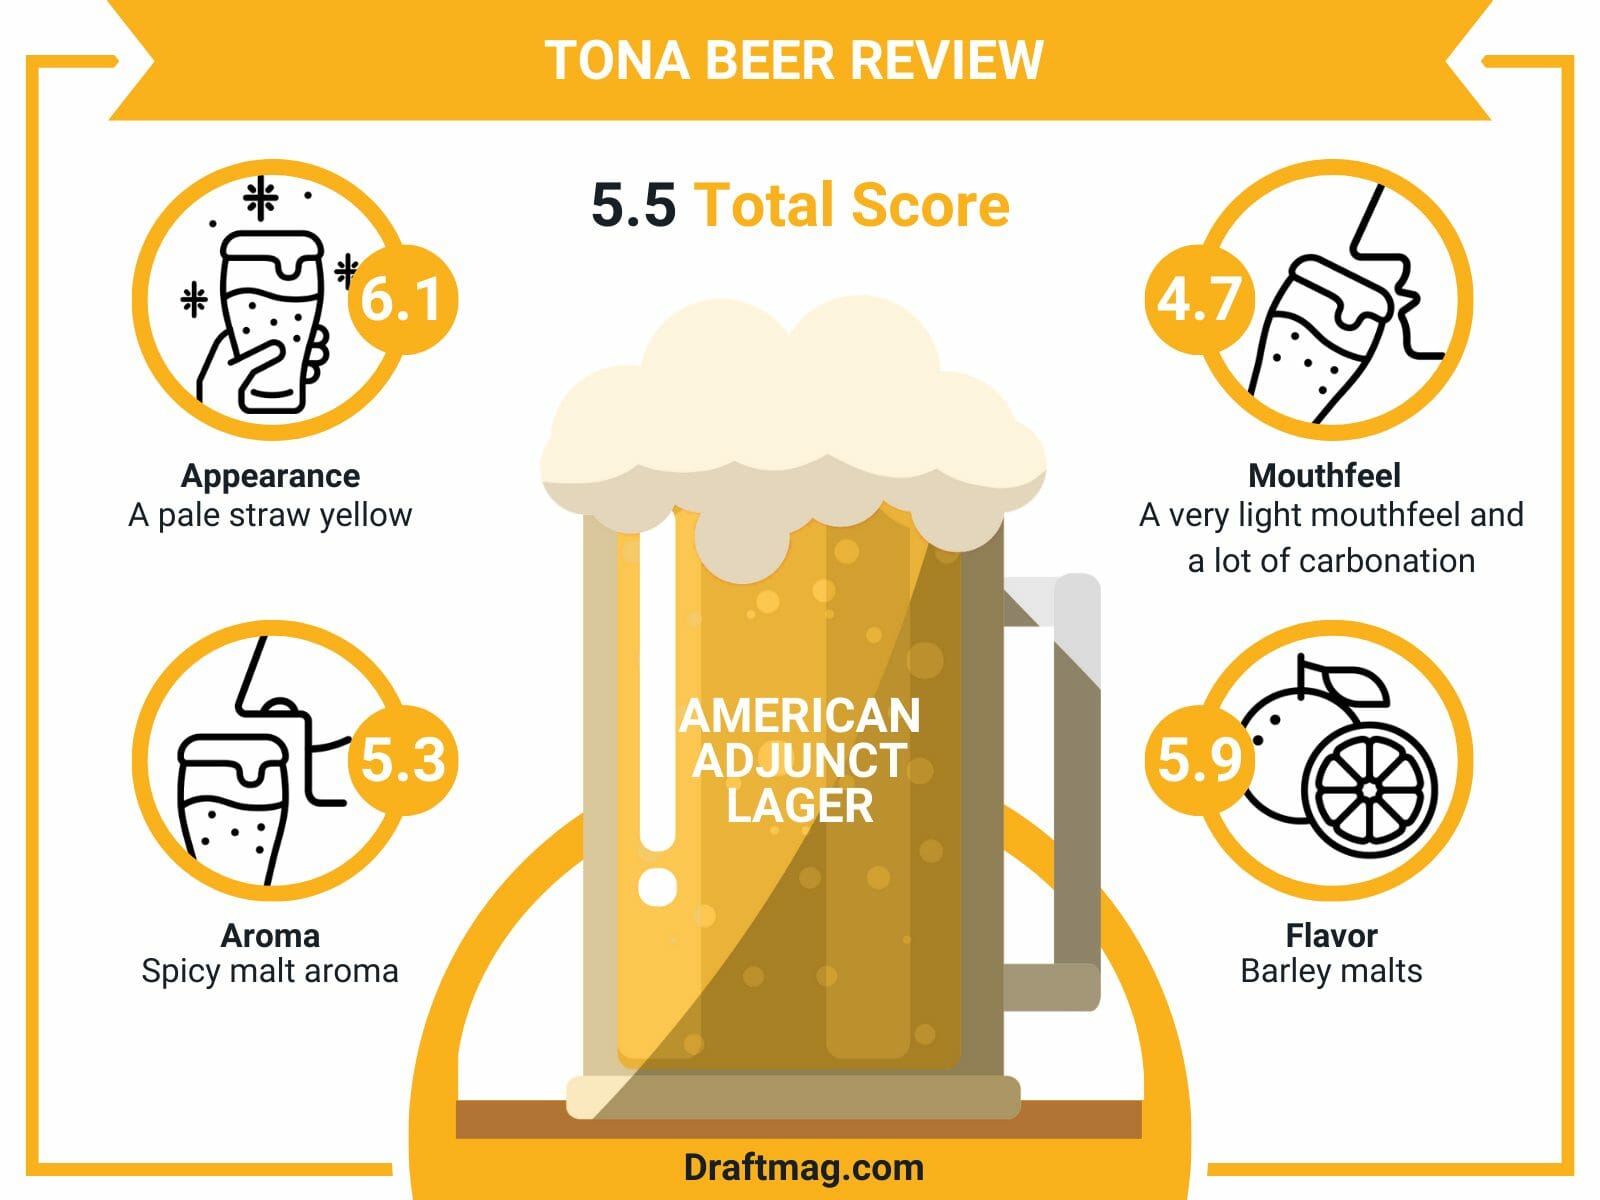 Tona beer review infographic